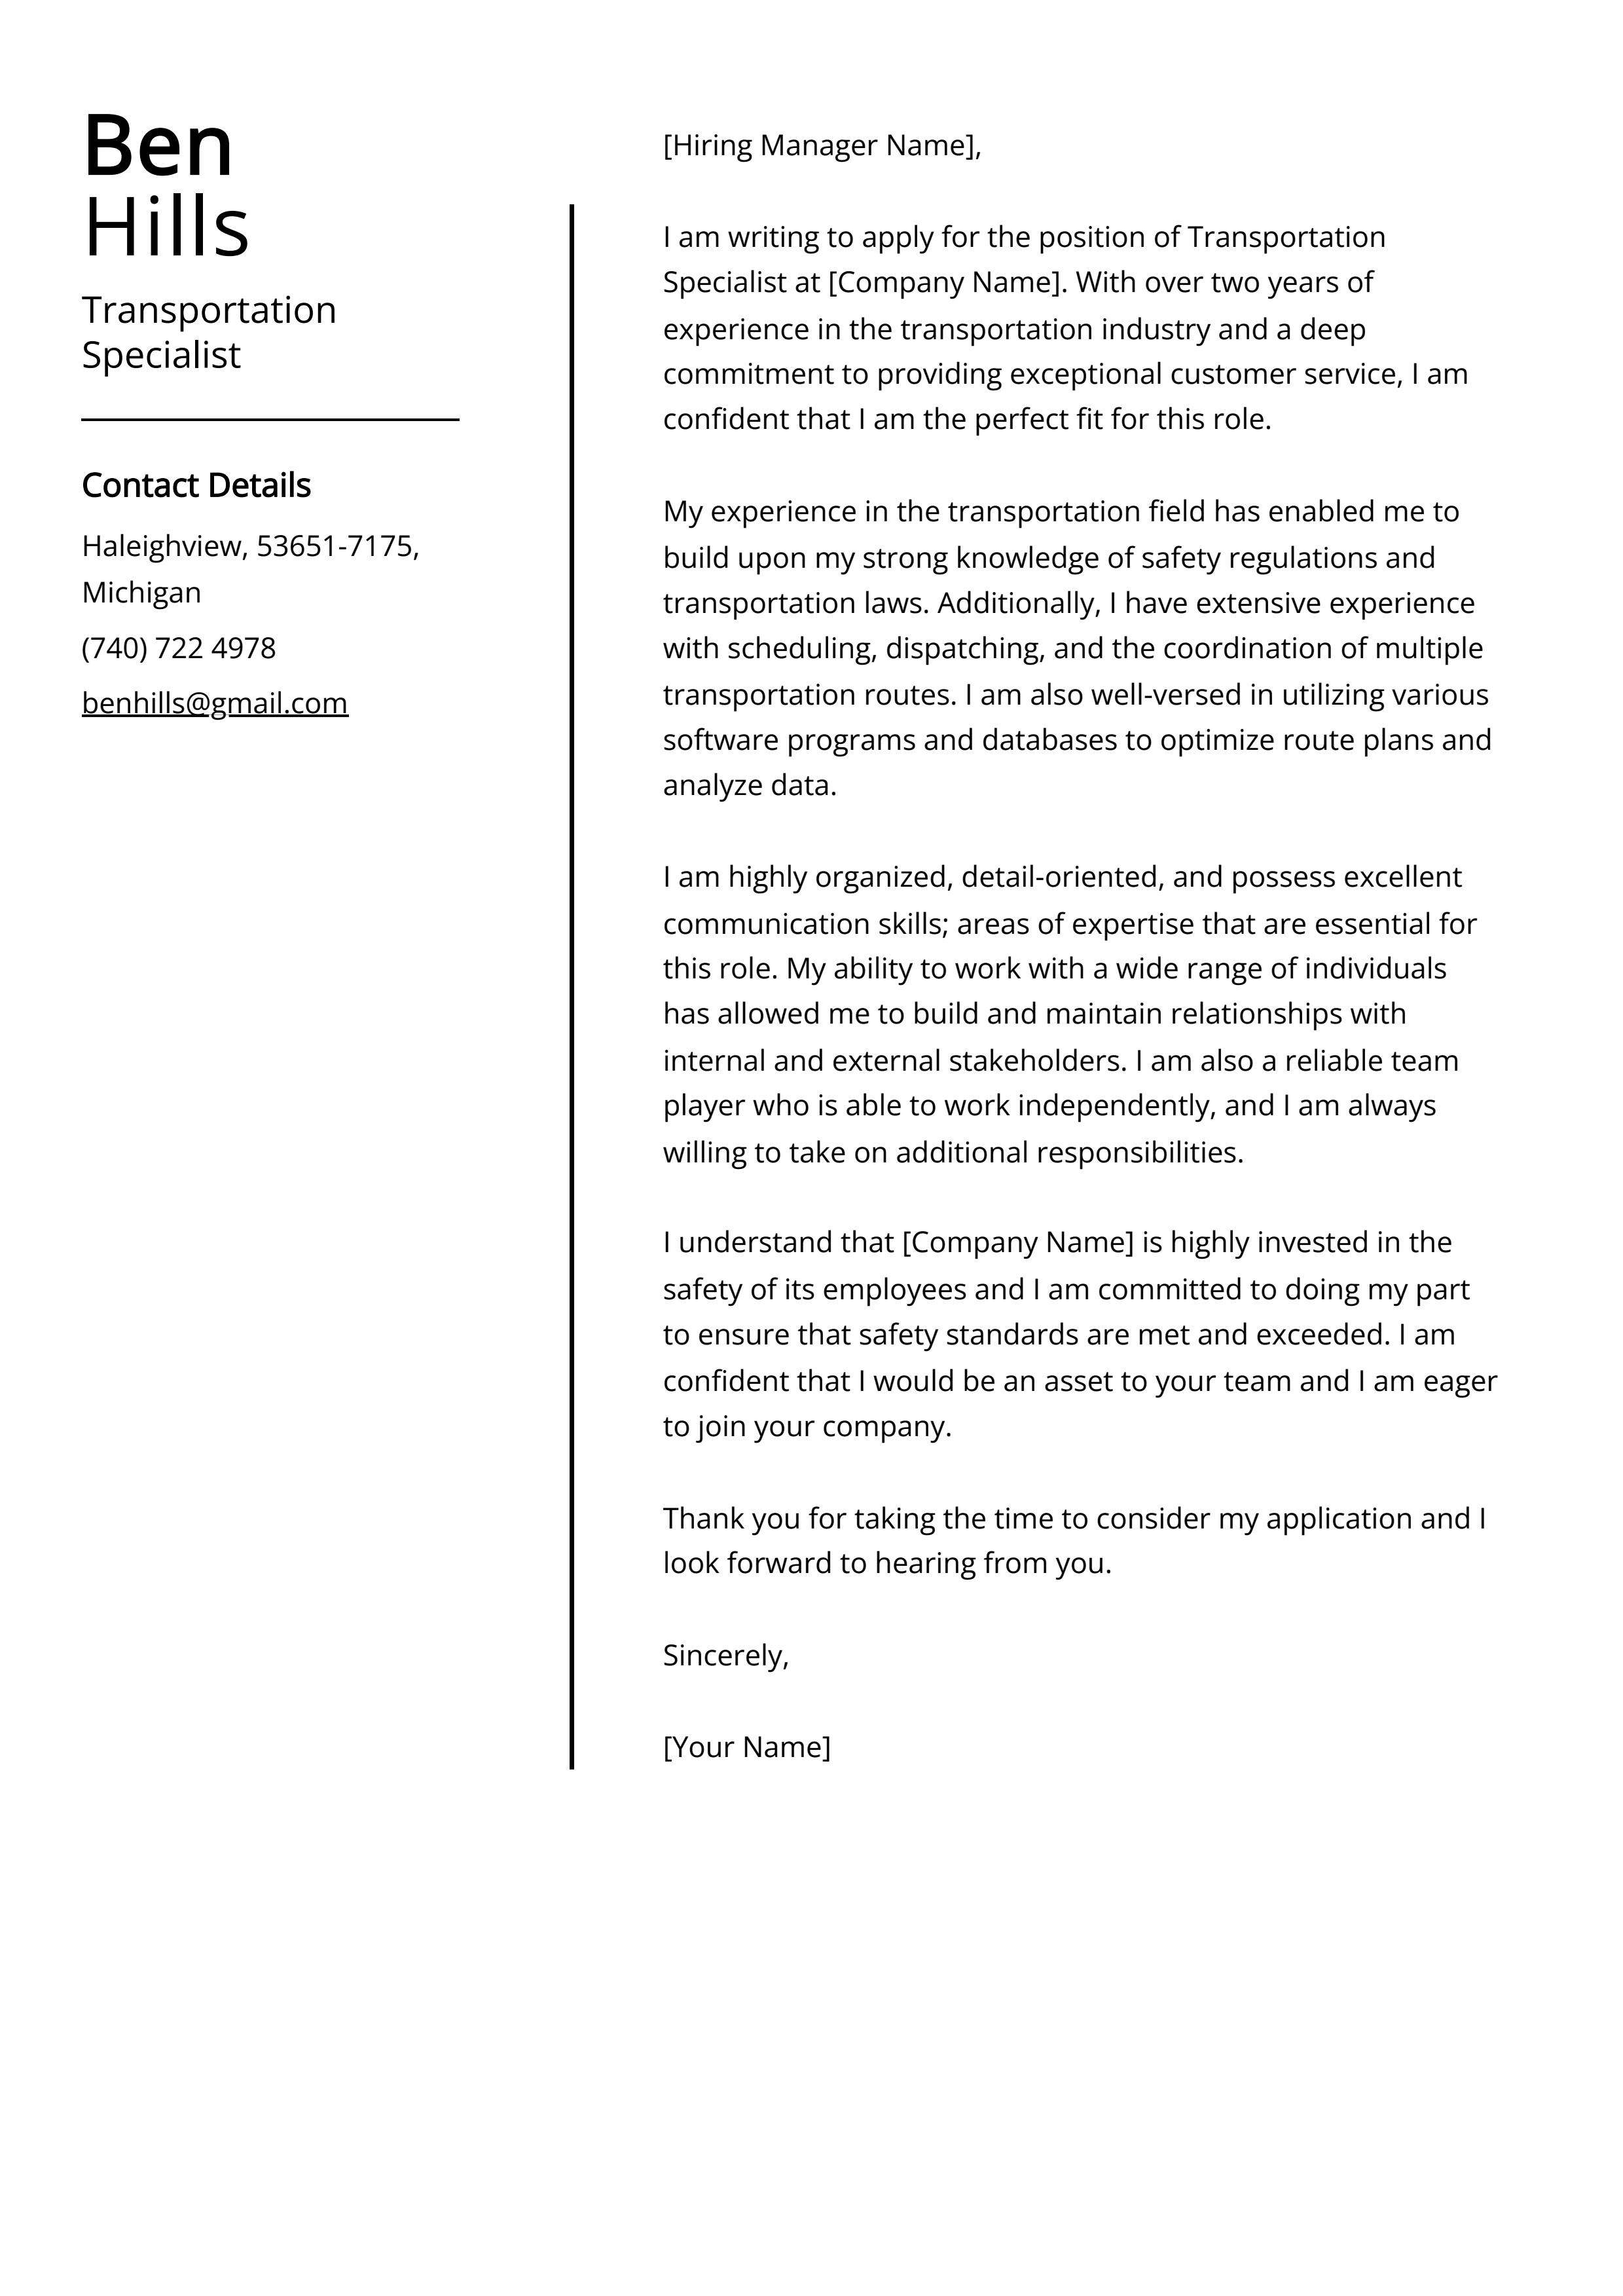 Transportation Specialist Cover Letter Example